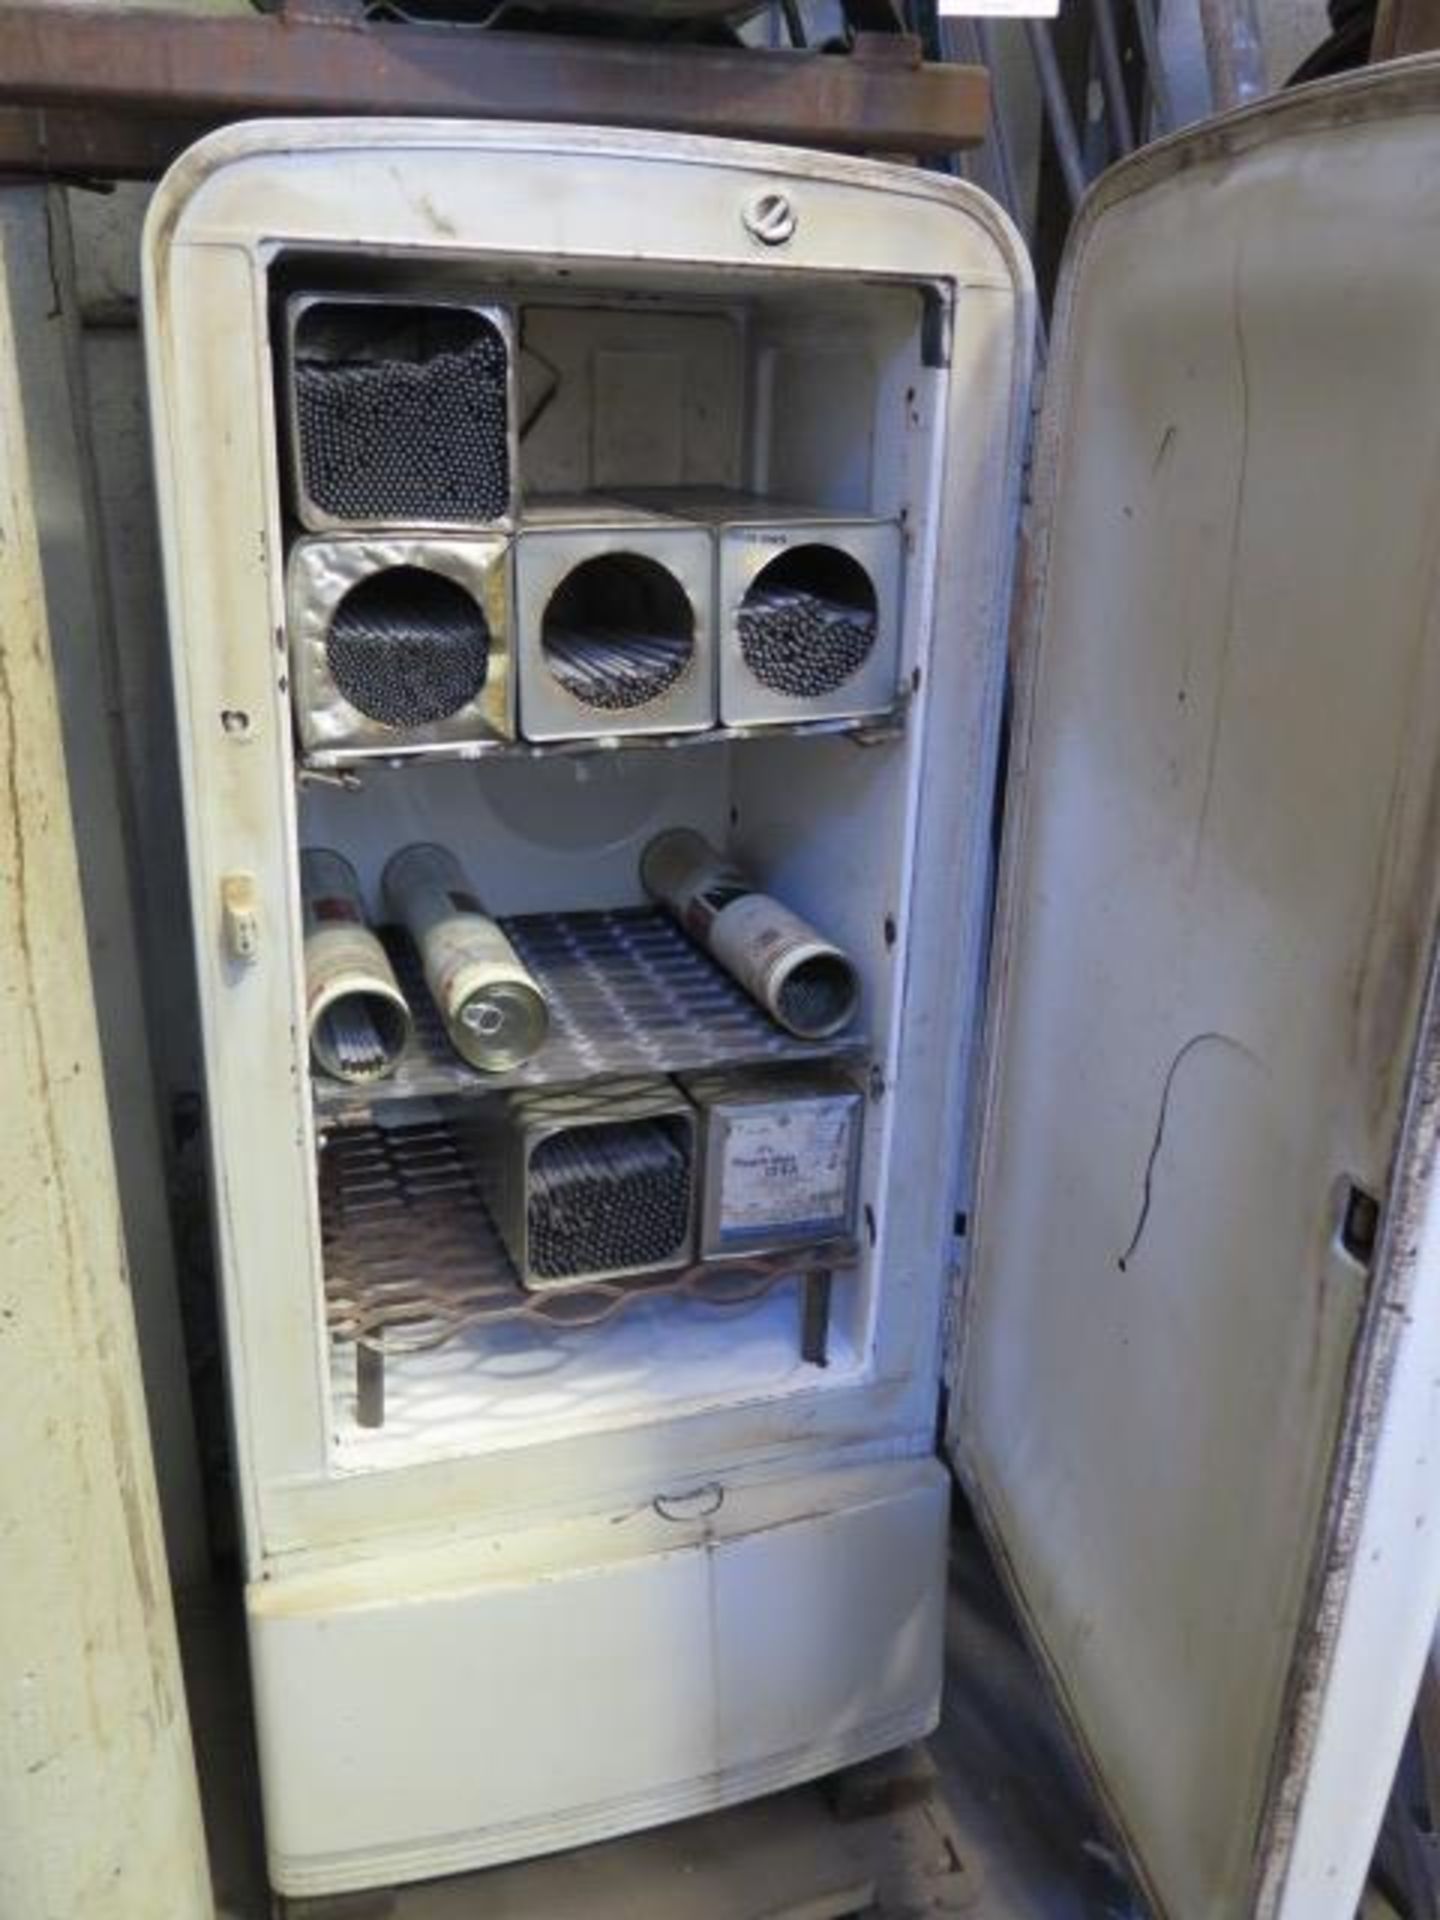 Dry-Rod Electrode Stabilization Oven and Converted Refrigerstor (SOLD AS-IS - NO WARRANTY) - Image 3 of 7